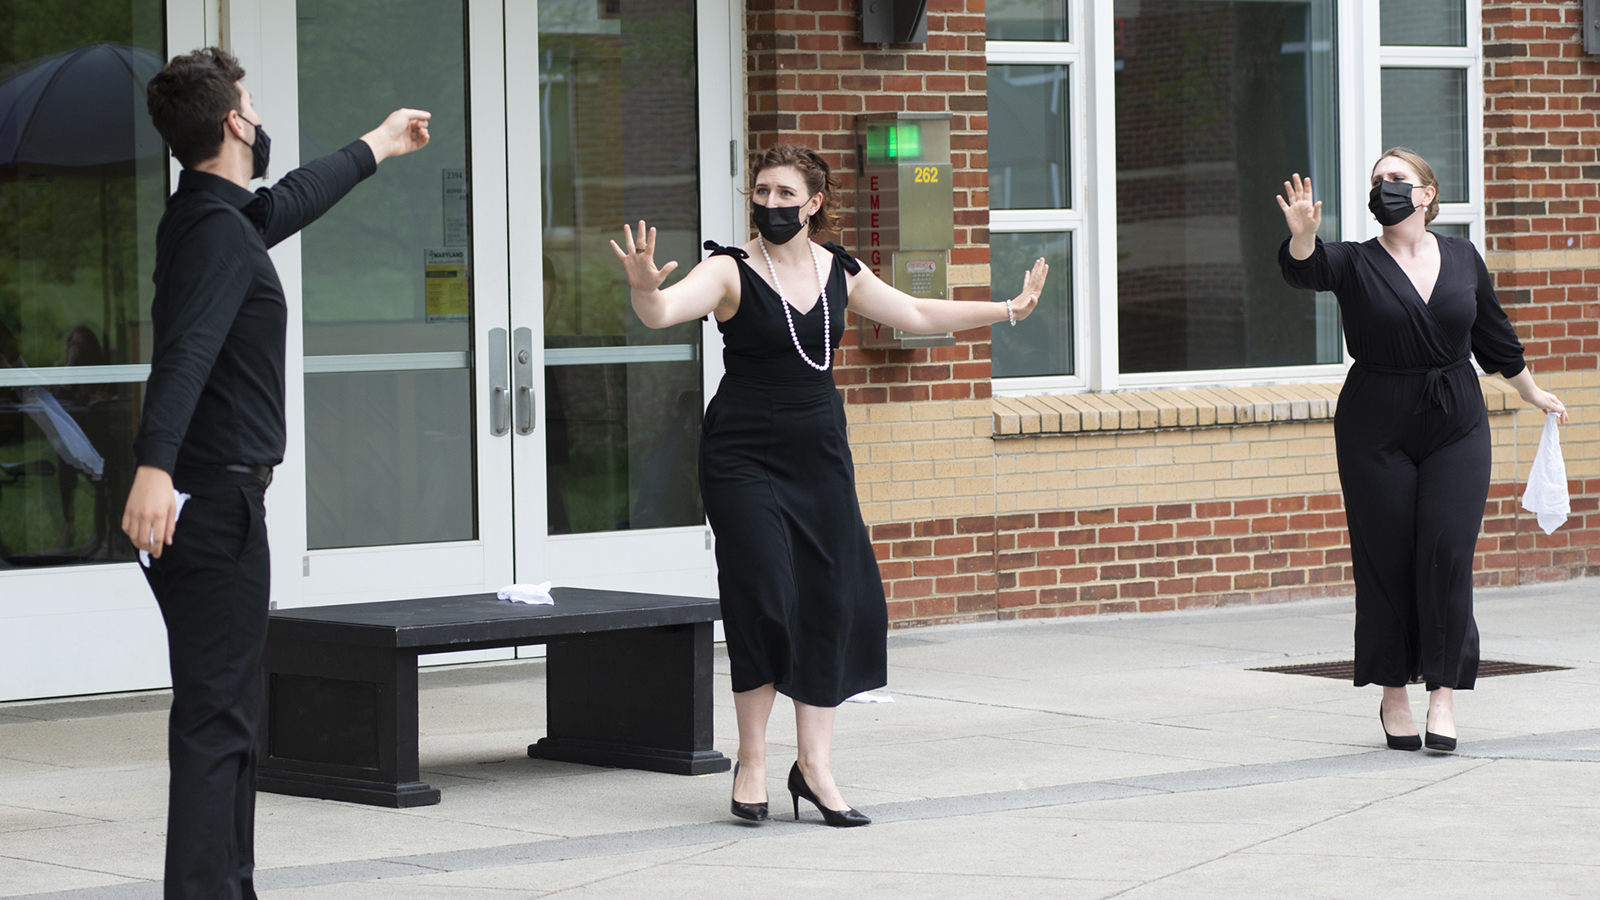  Three opera students performing outside dressed in all black.